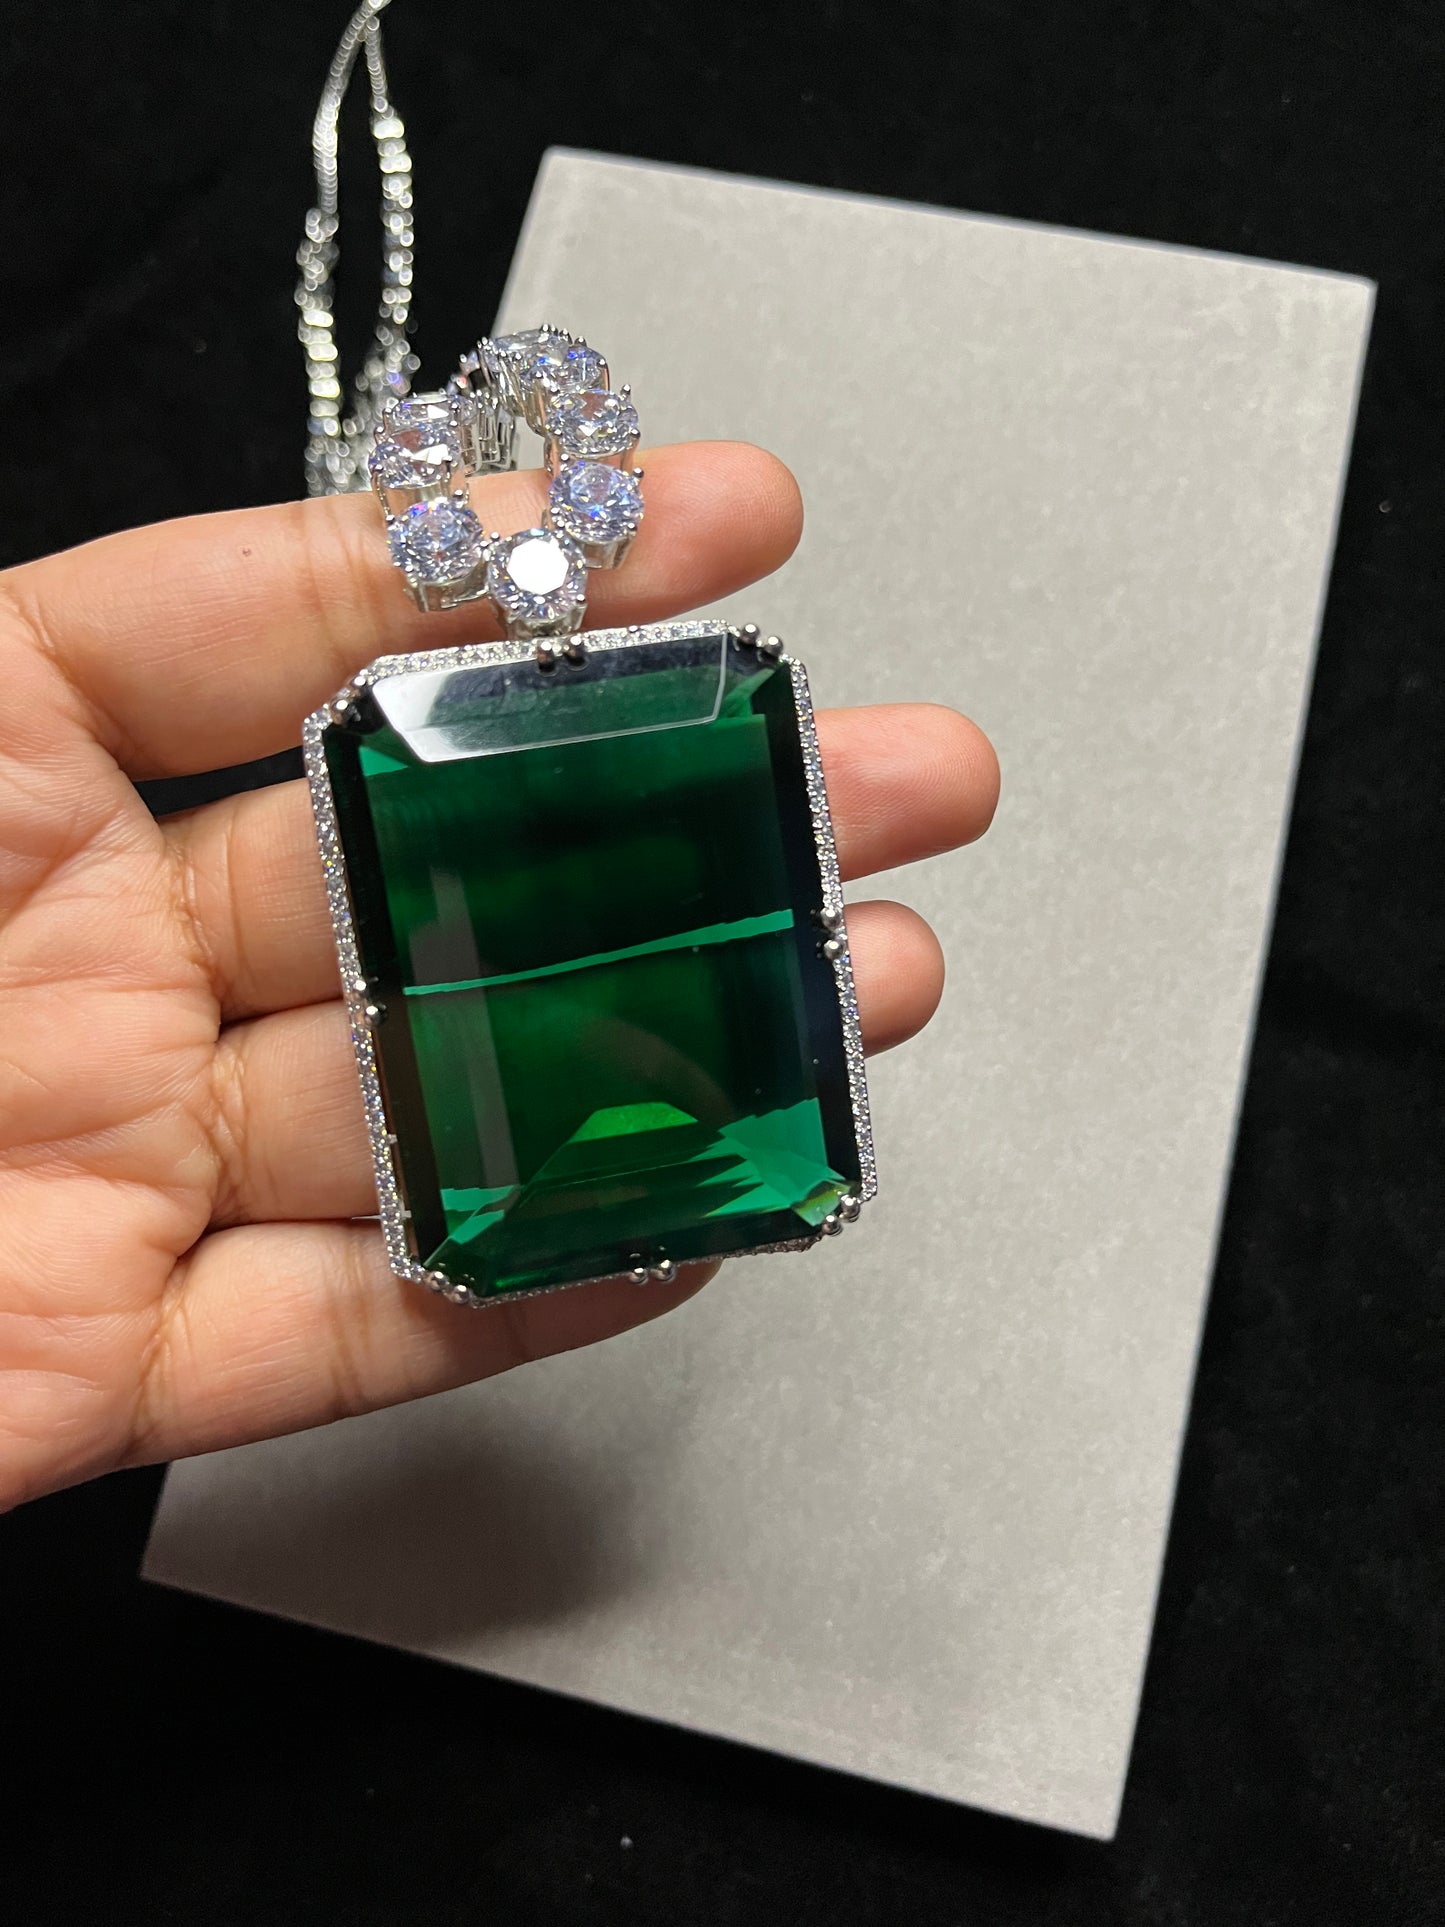 SS Classy Green Radiance: Sophisticated Gem Pendant Necklace with Earrings.